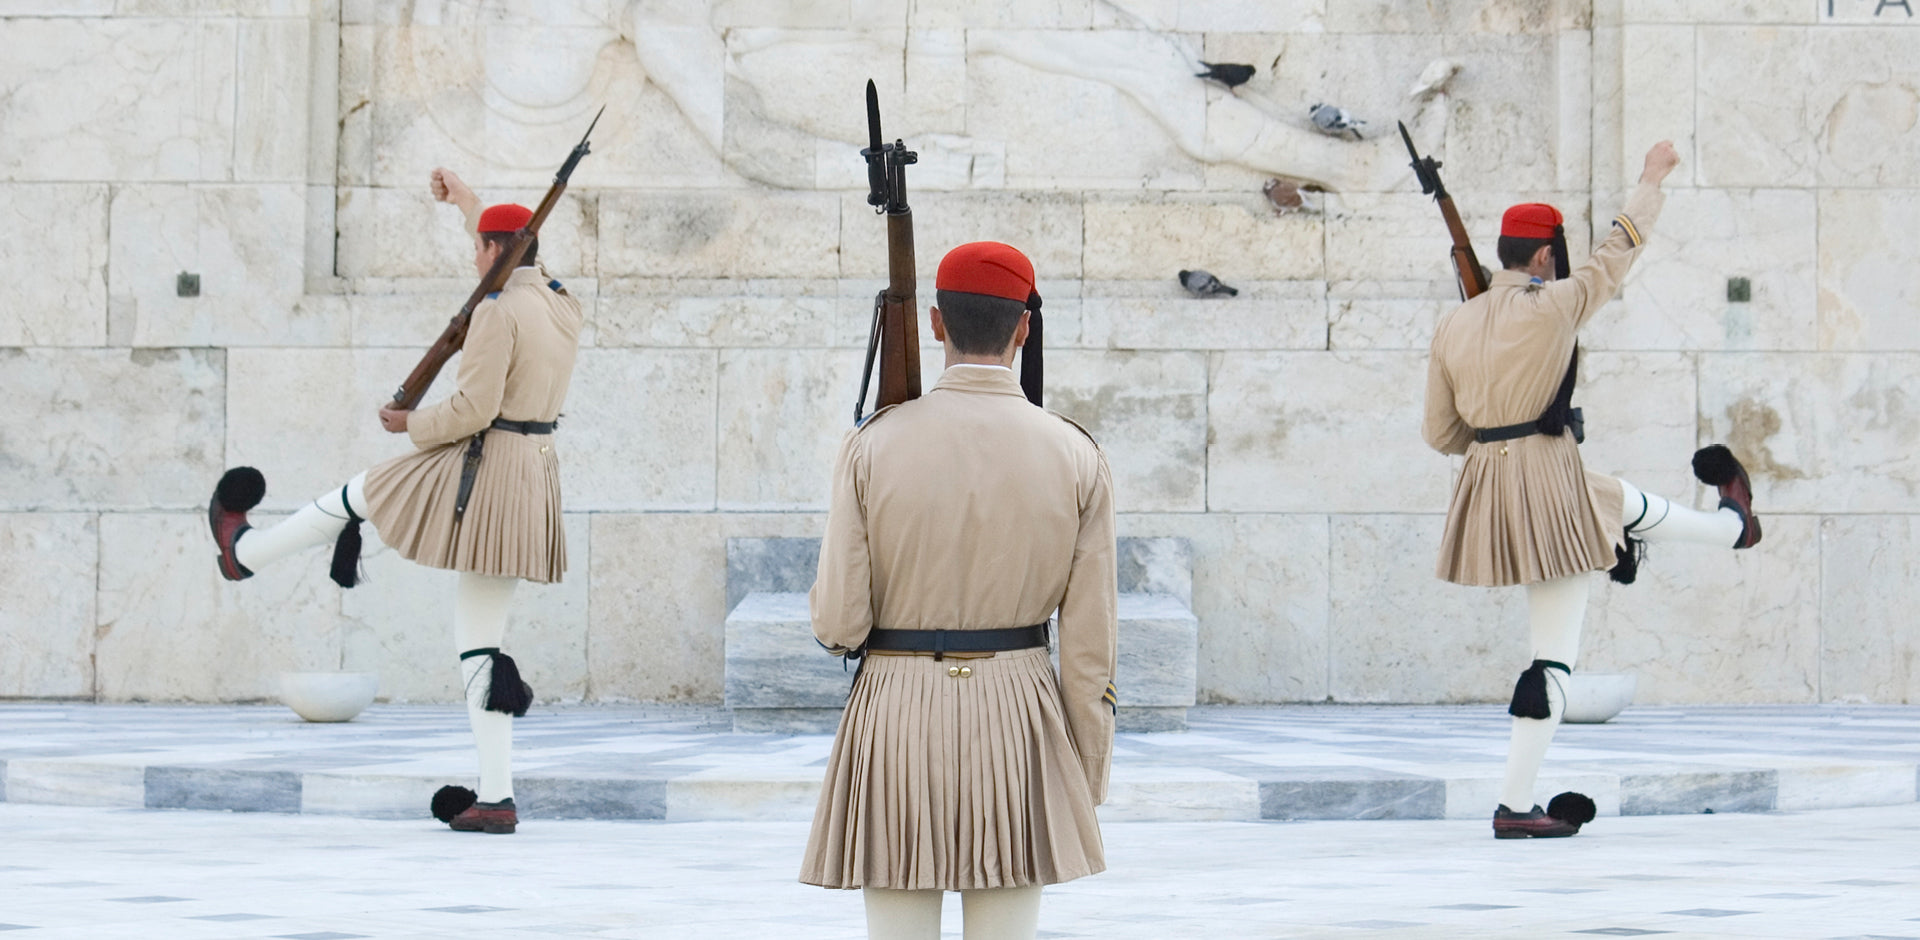 Changing of the Guard - The Greek EVZONES